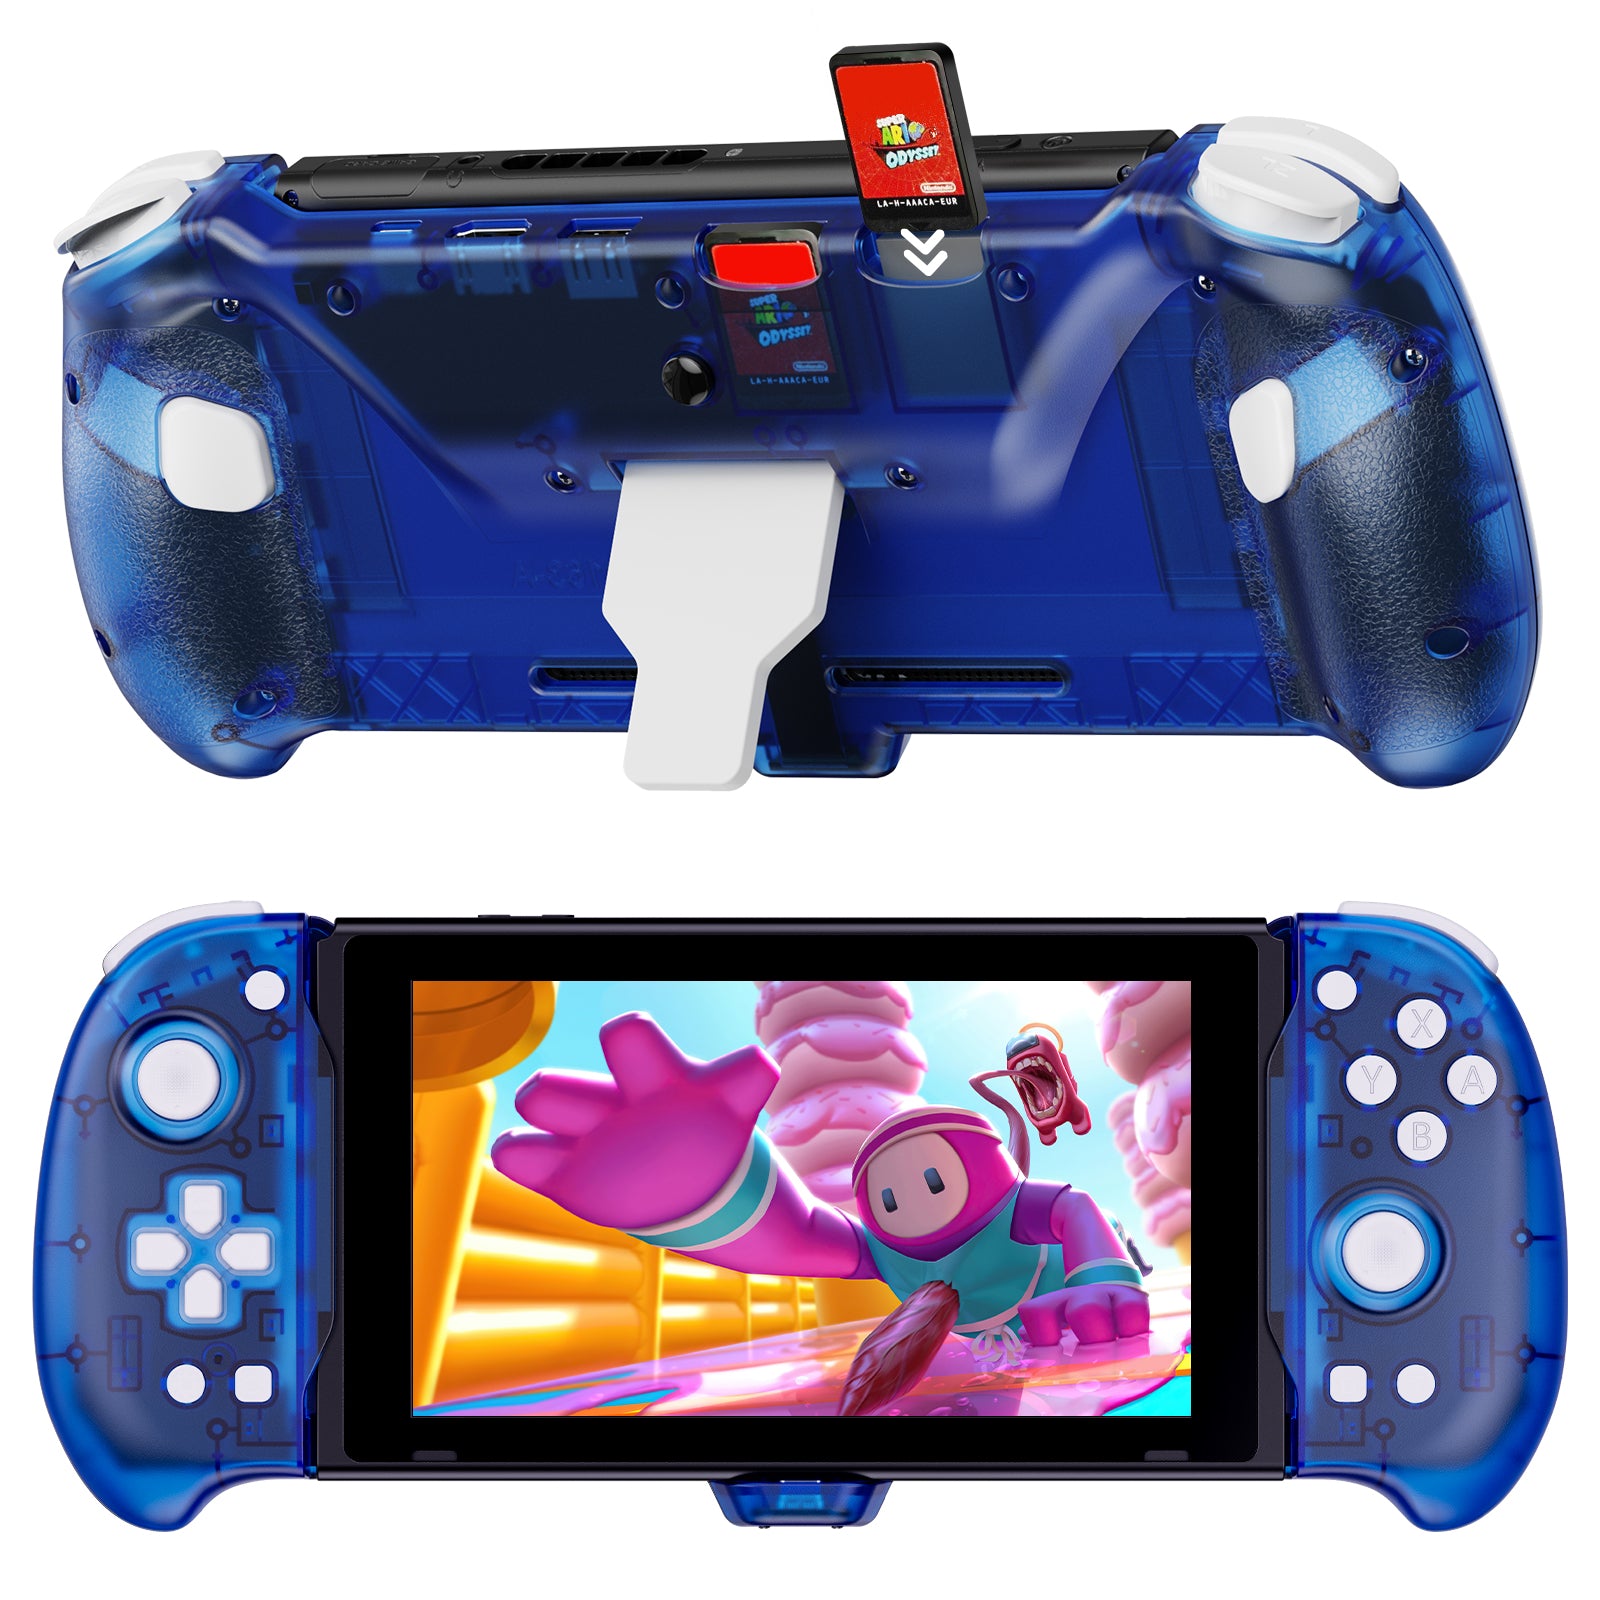 Blue Switch GripCon controller with built-in HDMI port.